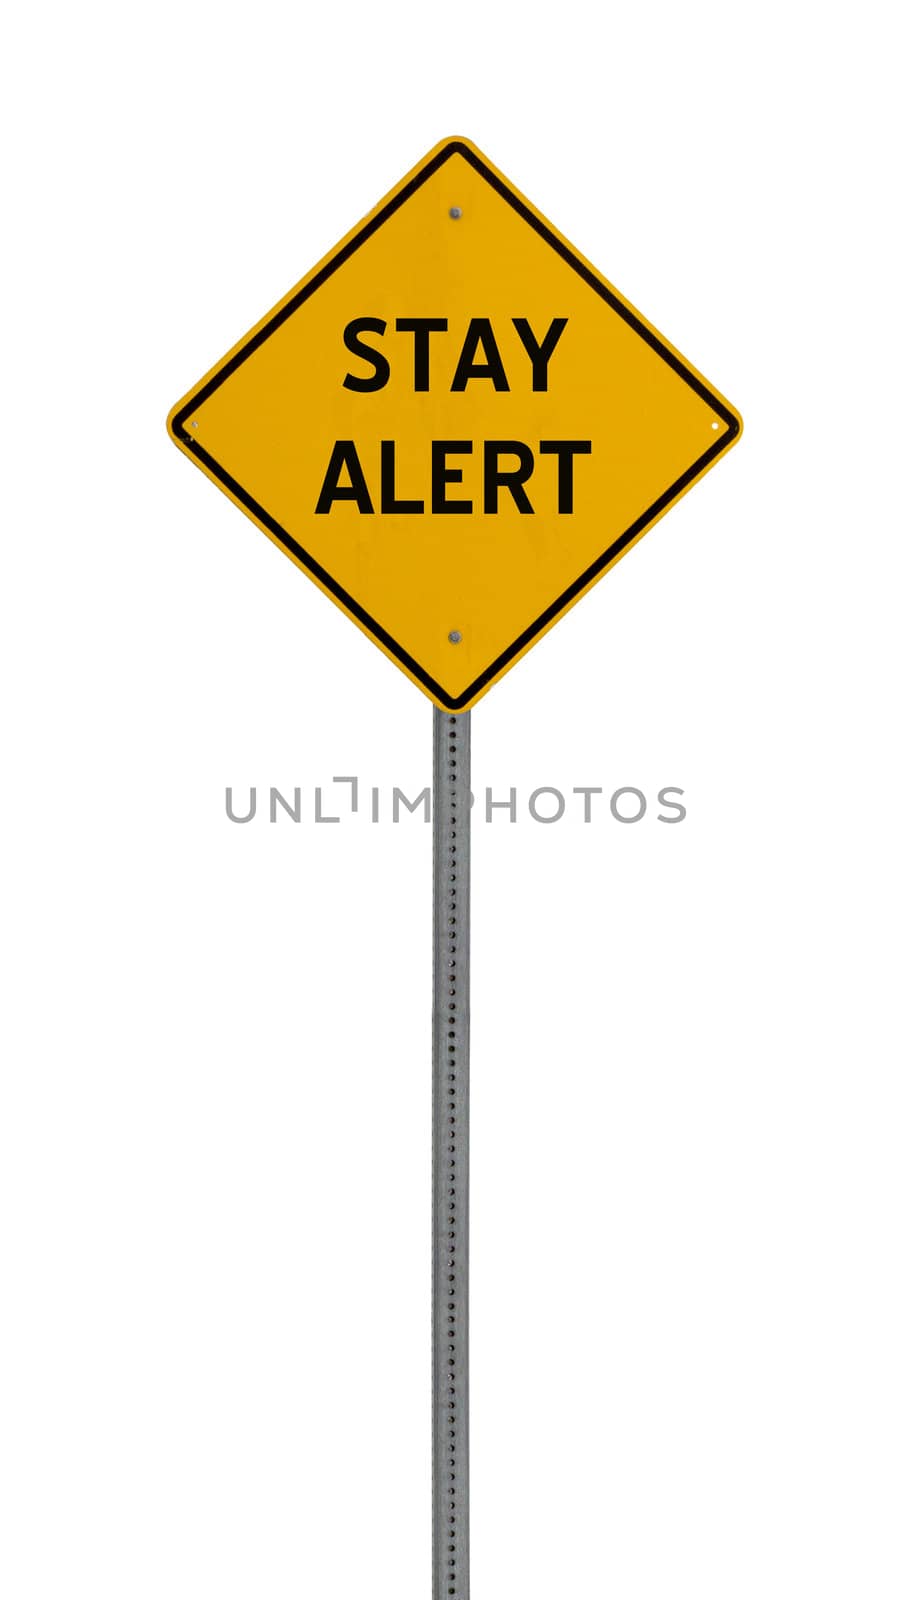 stay alert - Yellow road warning sign by jeremywhat